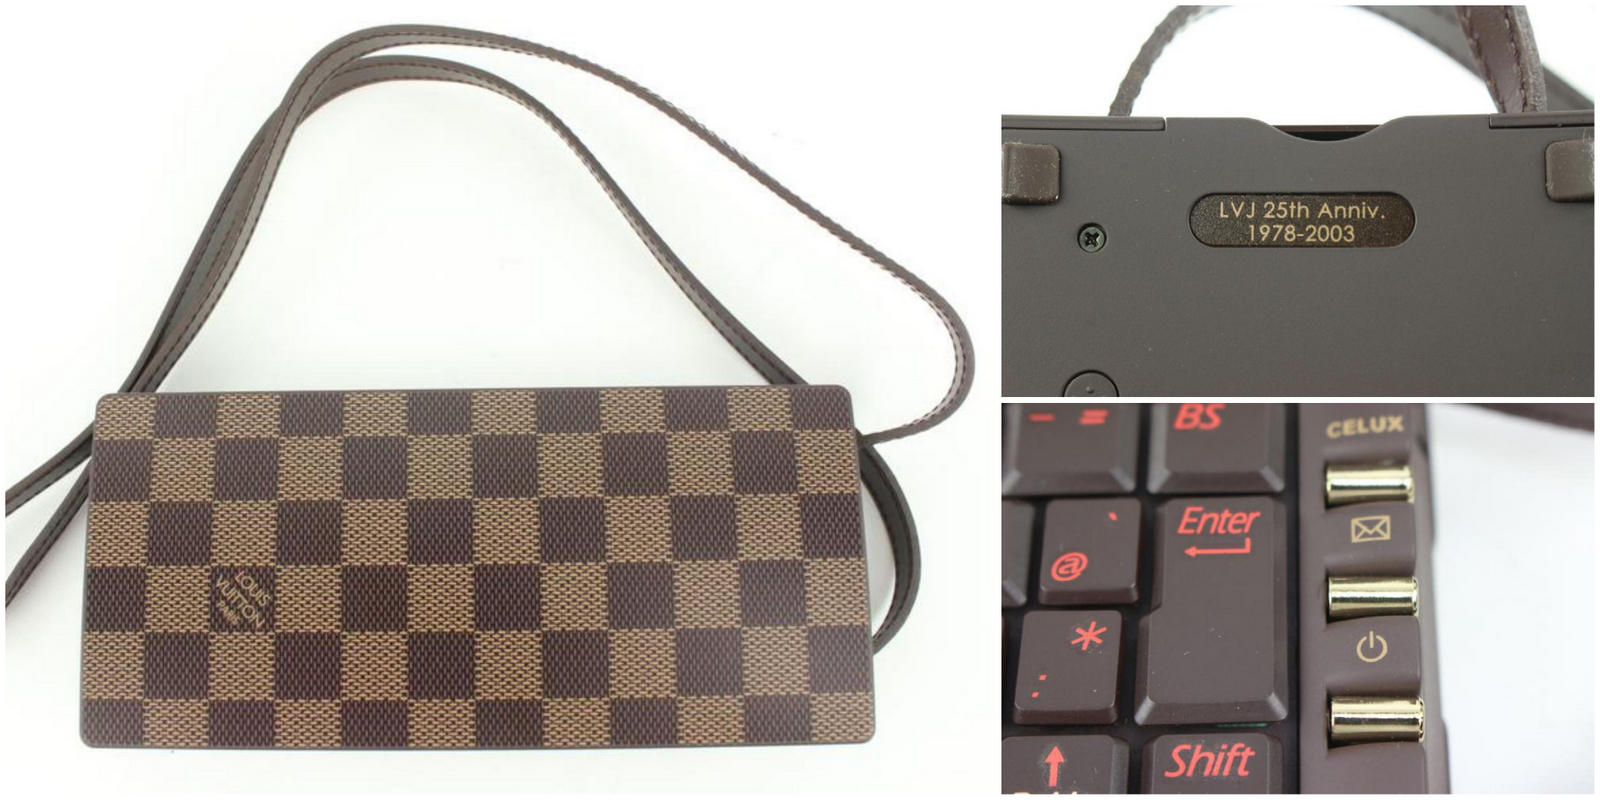 Louis Vuitton once made a stylish Windows laptop, and now it's available  for the price of an iPhone. - Luxurylaunches